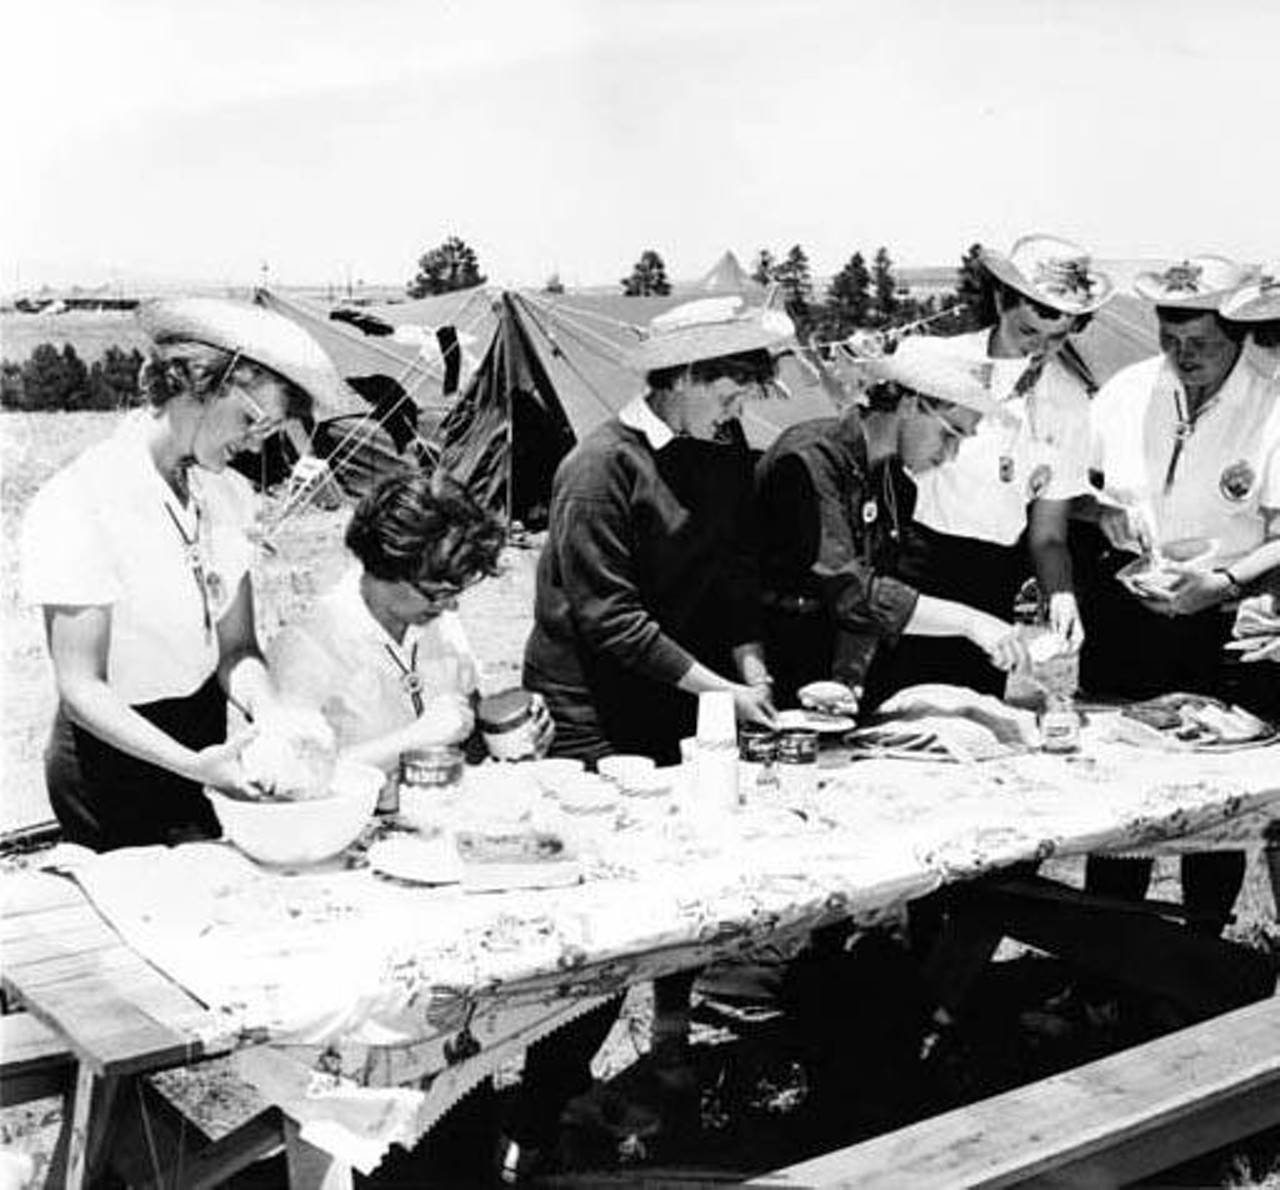 Girl Scouts preparing food at picnic table while camping, 1959.